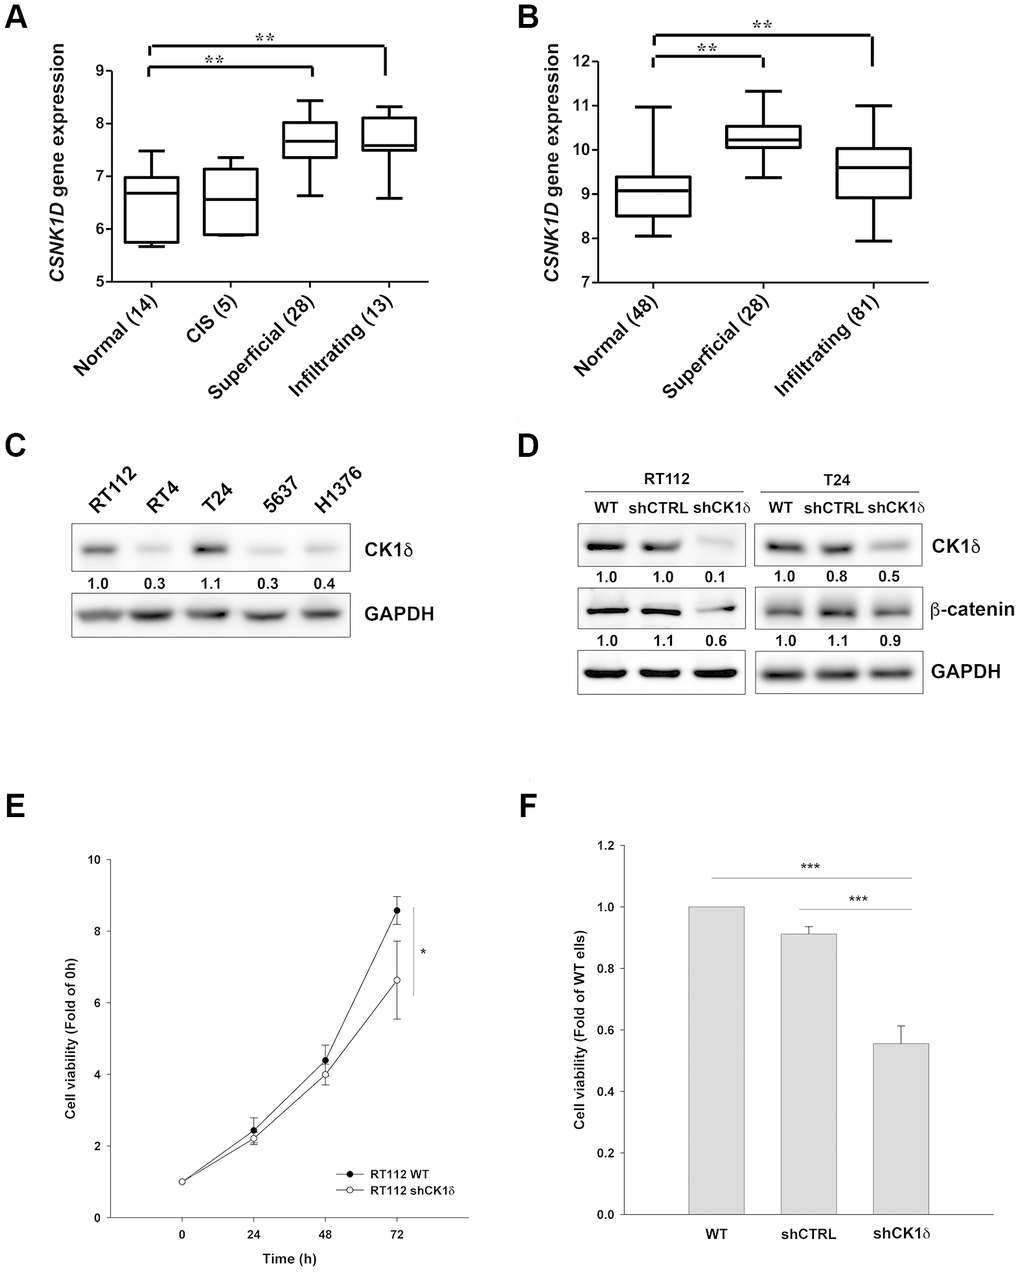 CK1δ promotes growth of bladder cancer cells. (A, B) Gene expression levels of CSNK1D in tissue samples of normal, carcinoma in situ (CIS), superficial and infiltrating bladder cancer patients obtained from Dyrskjot bladder dataset (A) or Sanchez-Carbayo bladder dataset (B). **PC) Protein levels of CK1δ in different bladder cancer cell lines analyzed by Western blotting. (D) Control shRNA (shCTRL) or shCK1δ plasmids were transduced into RT112 and T24 cells by lentivirus and the cells were subjected to Western blotting with the indicated antibodies. (E, F) CK1δ knockdown decreases the viability of RT112 (E) and T24 (F) cells at 72 h by MTT assay. Date are represented as mean ± S.D. *PP